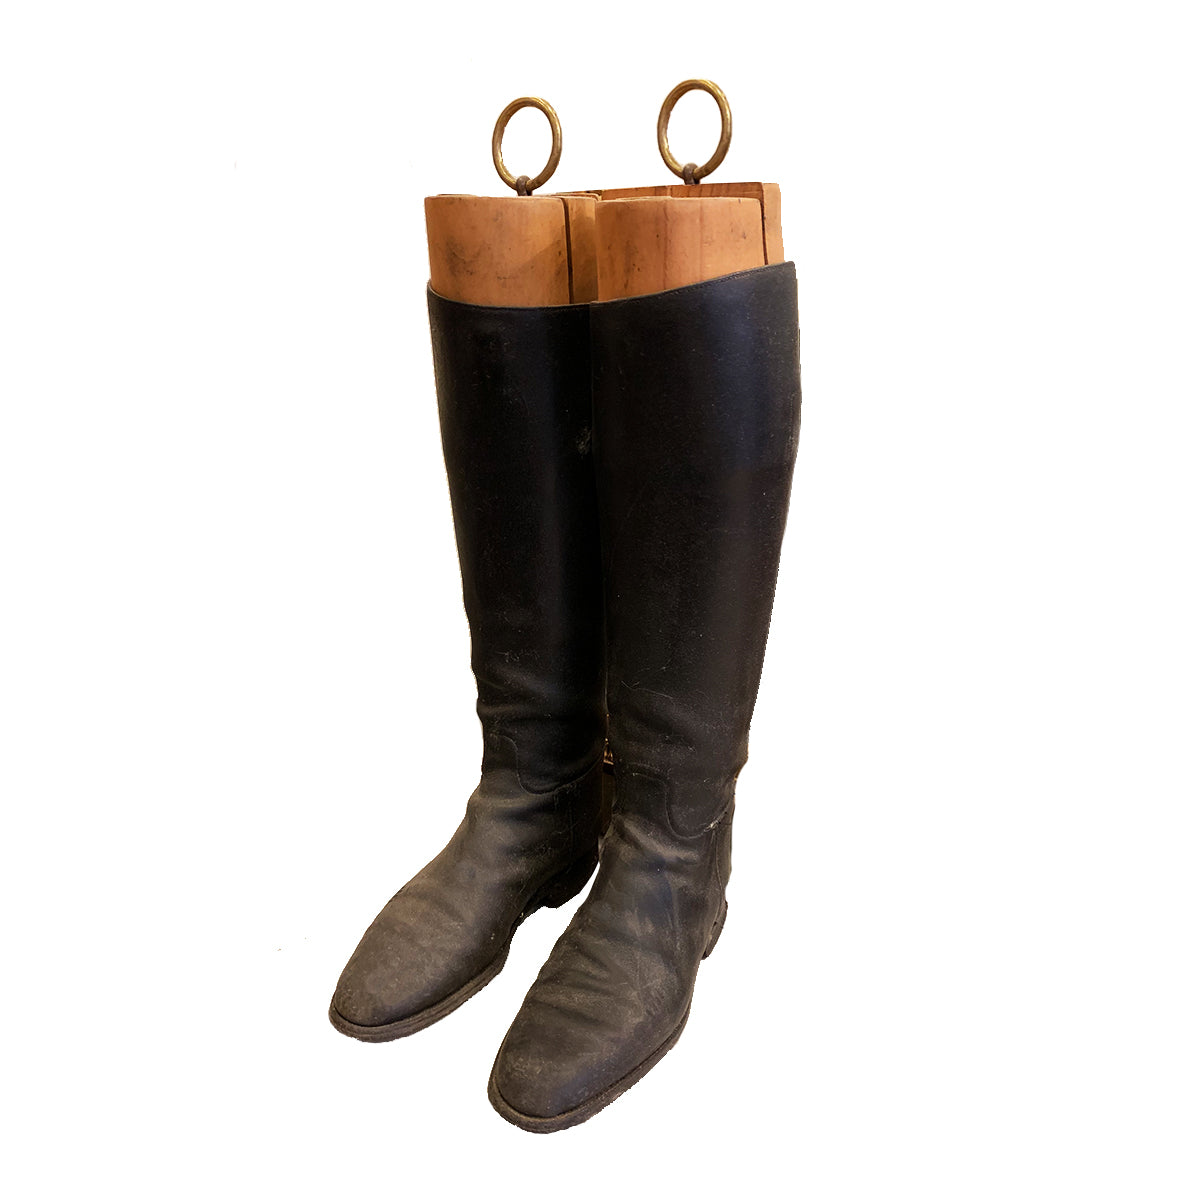 Pair Of Vintage Riding Boots